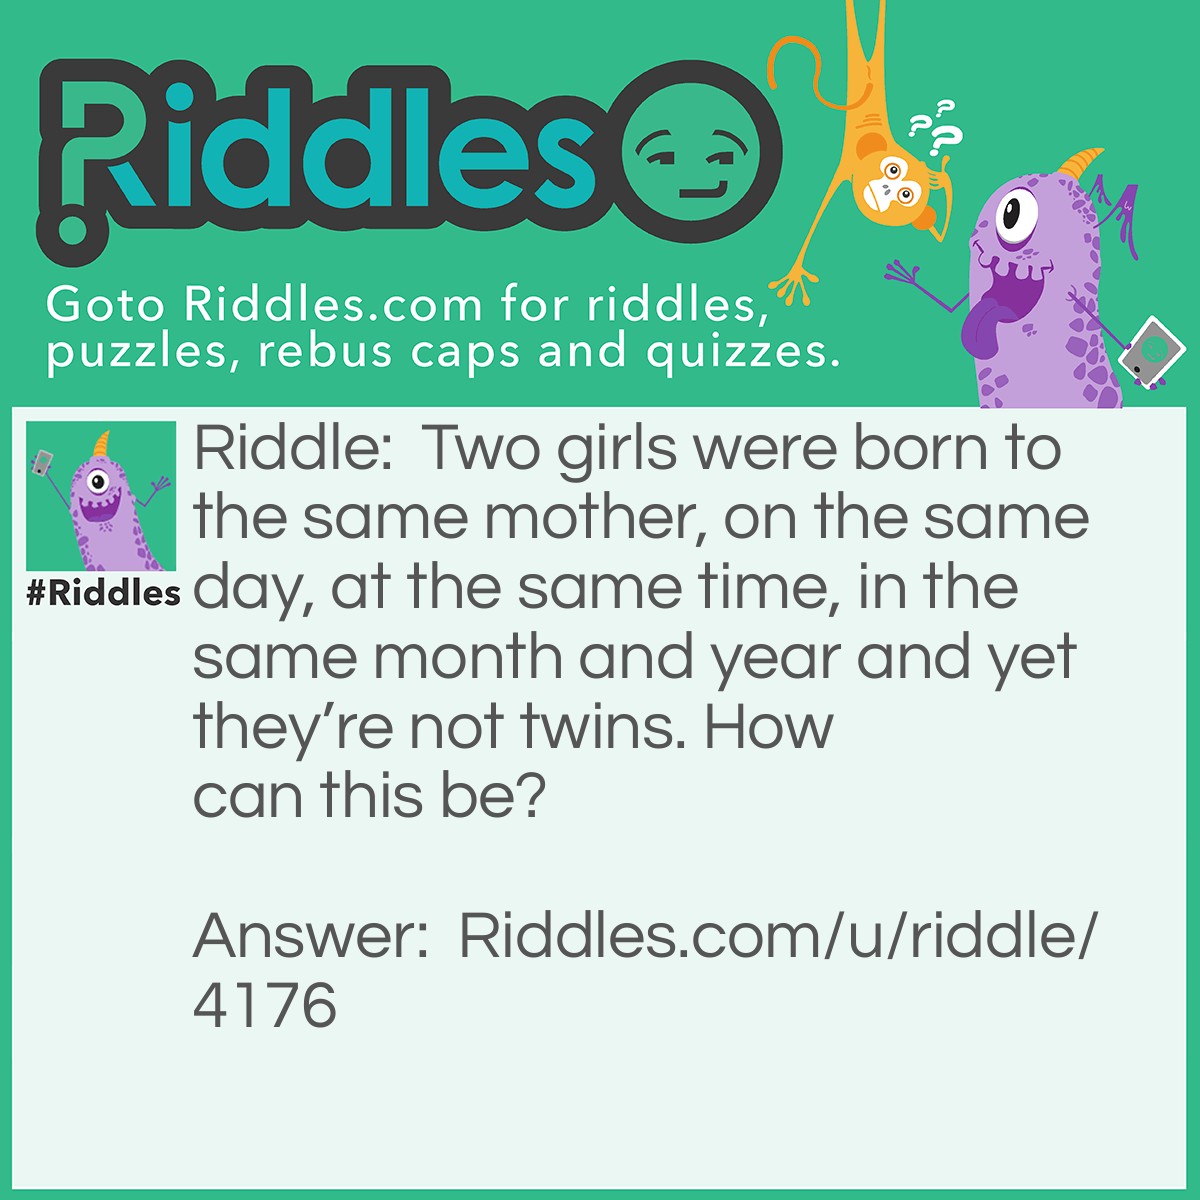 Riddle: Two girls were born to the same mother, on the same day, at the same time, in the same month and year and yet they're not twins. How can this be? Answer: They are a set of triplets.